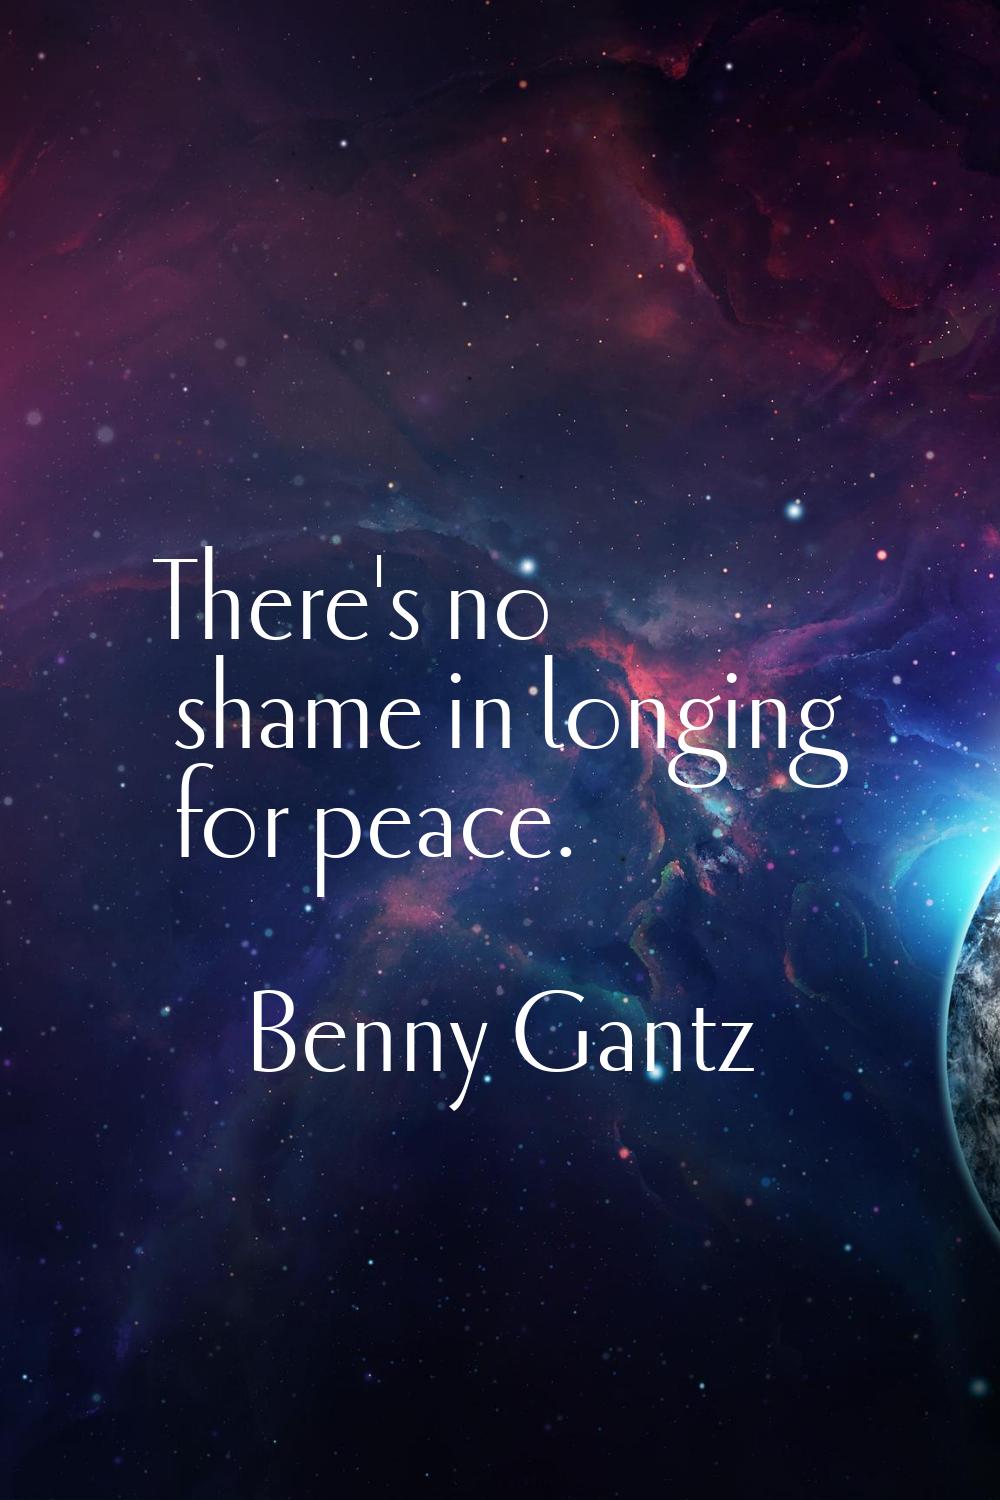 There's no shame in longing for peace.